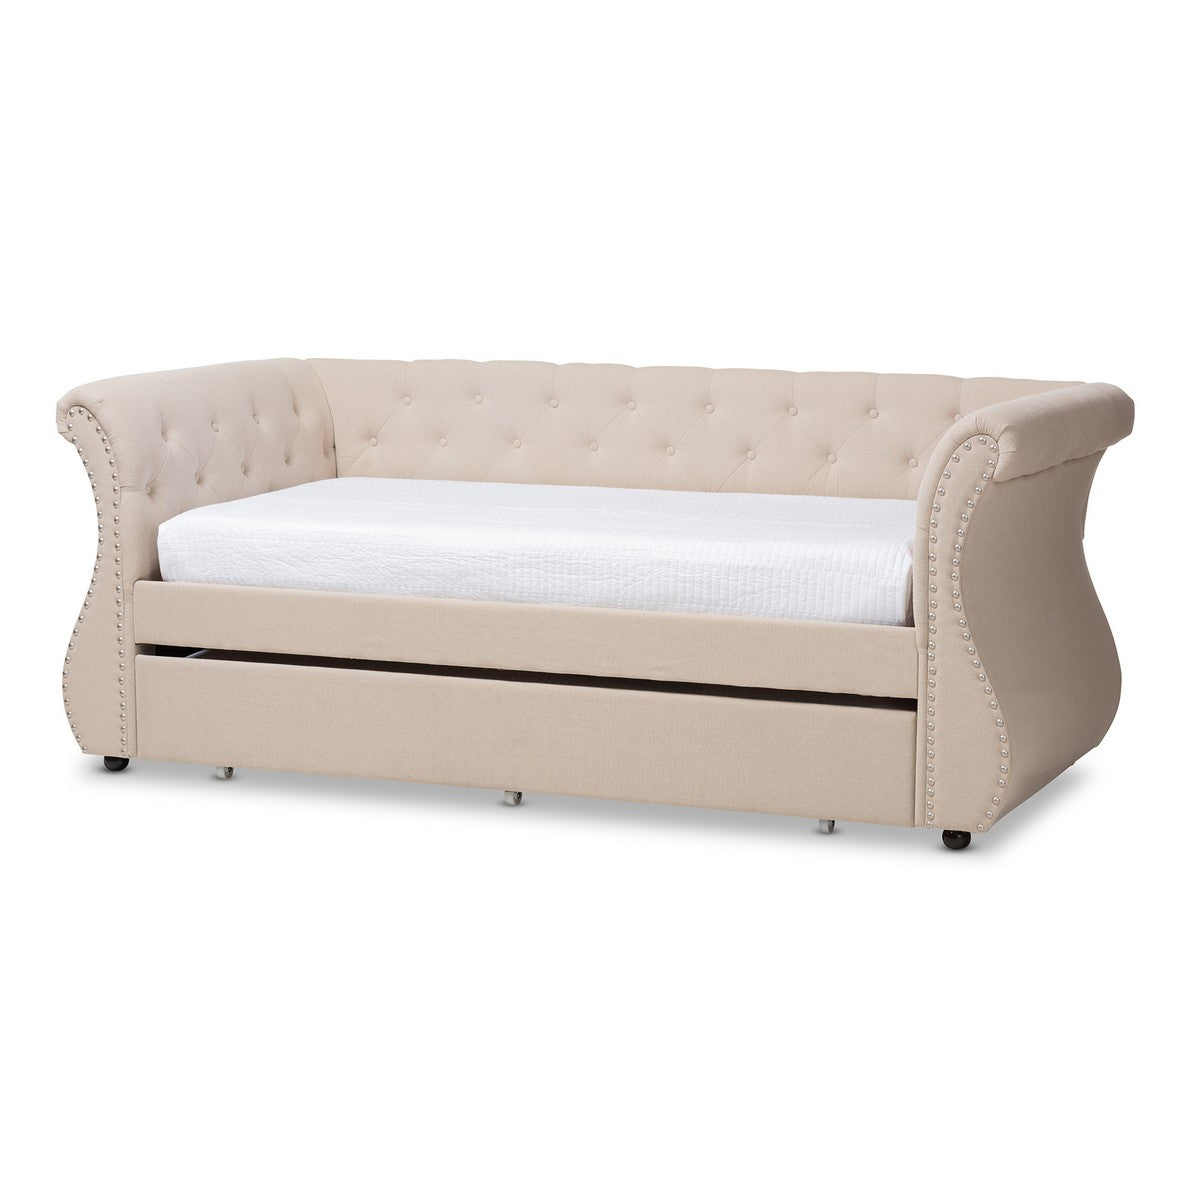 Baxton Studio Cherine Classic and Contemporary Beige Fabric Upholstered Daybed with Trundle Baxton Studio-daybed-Minimal And Modern - 1